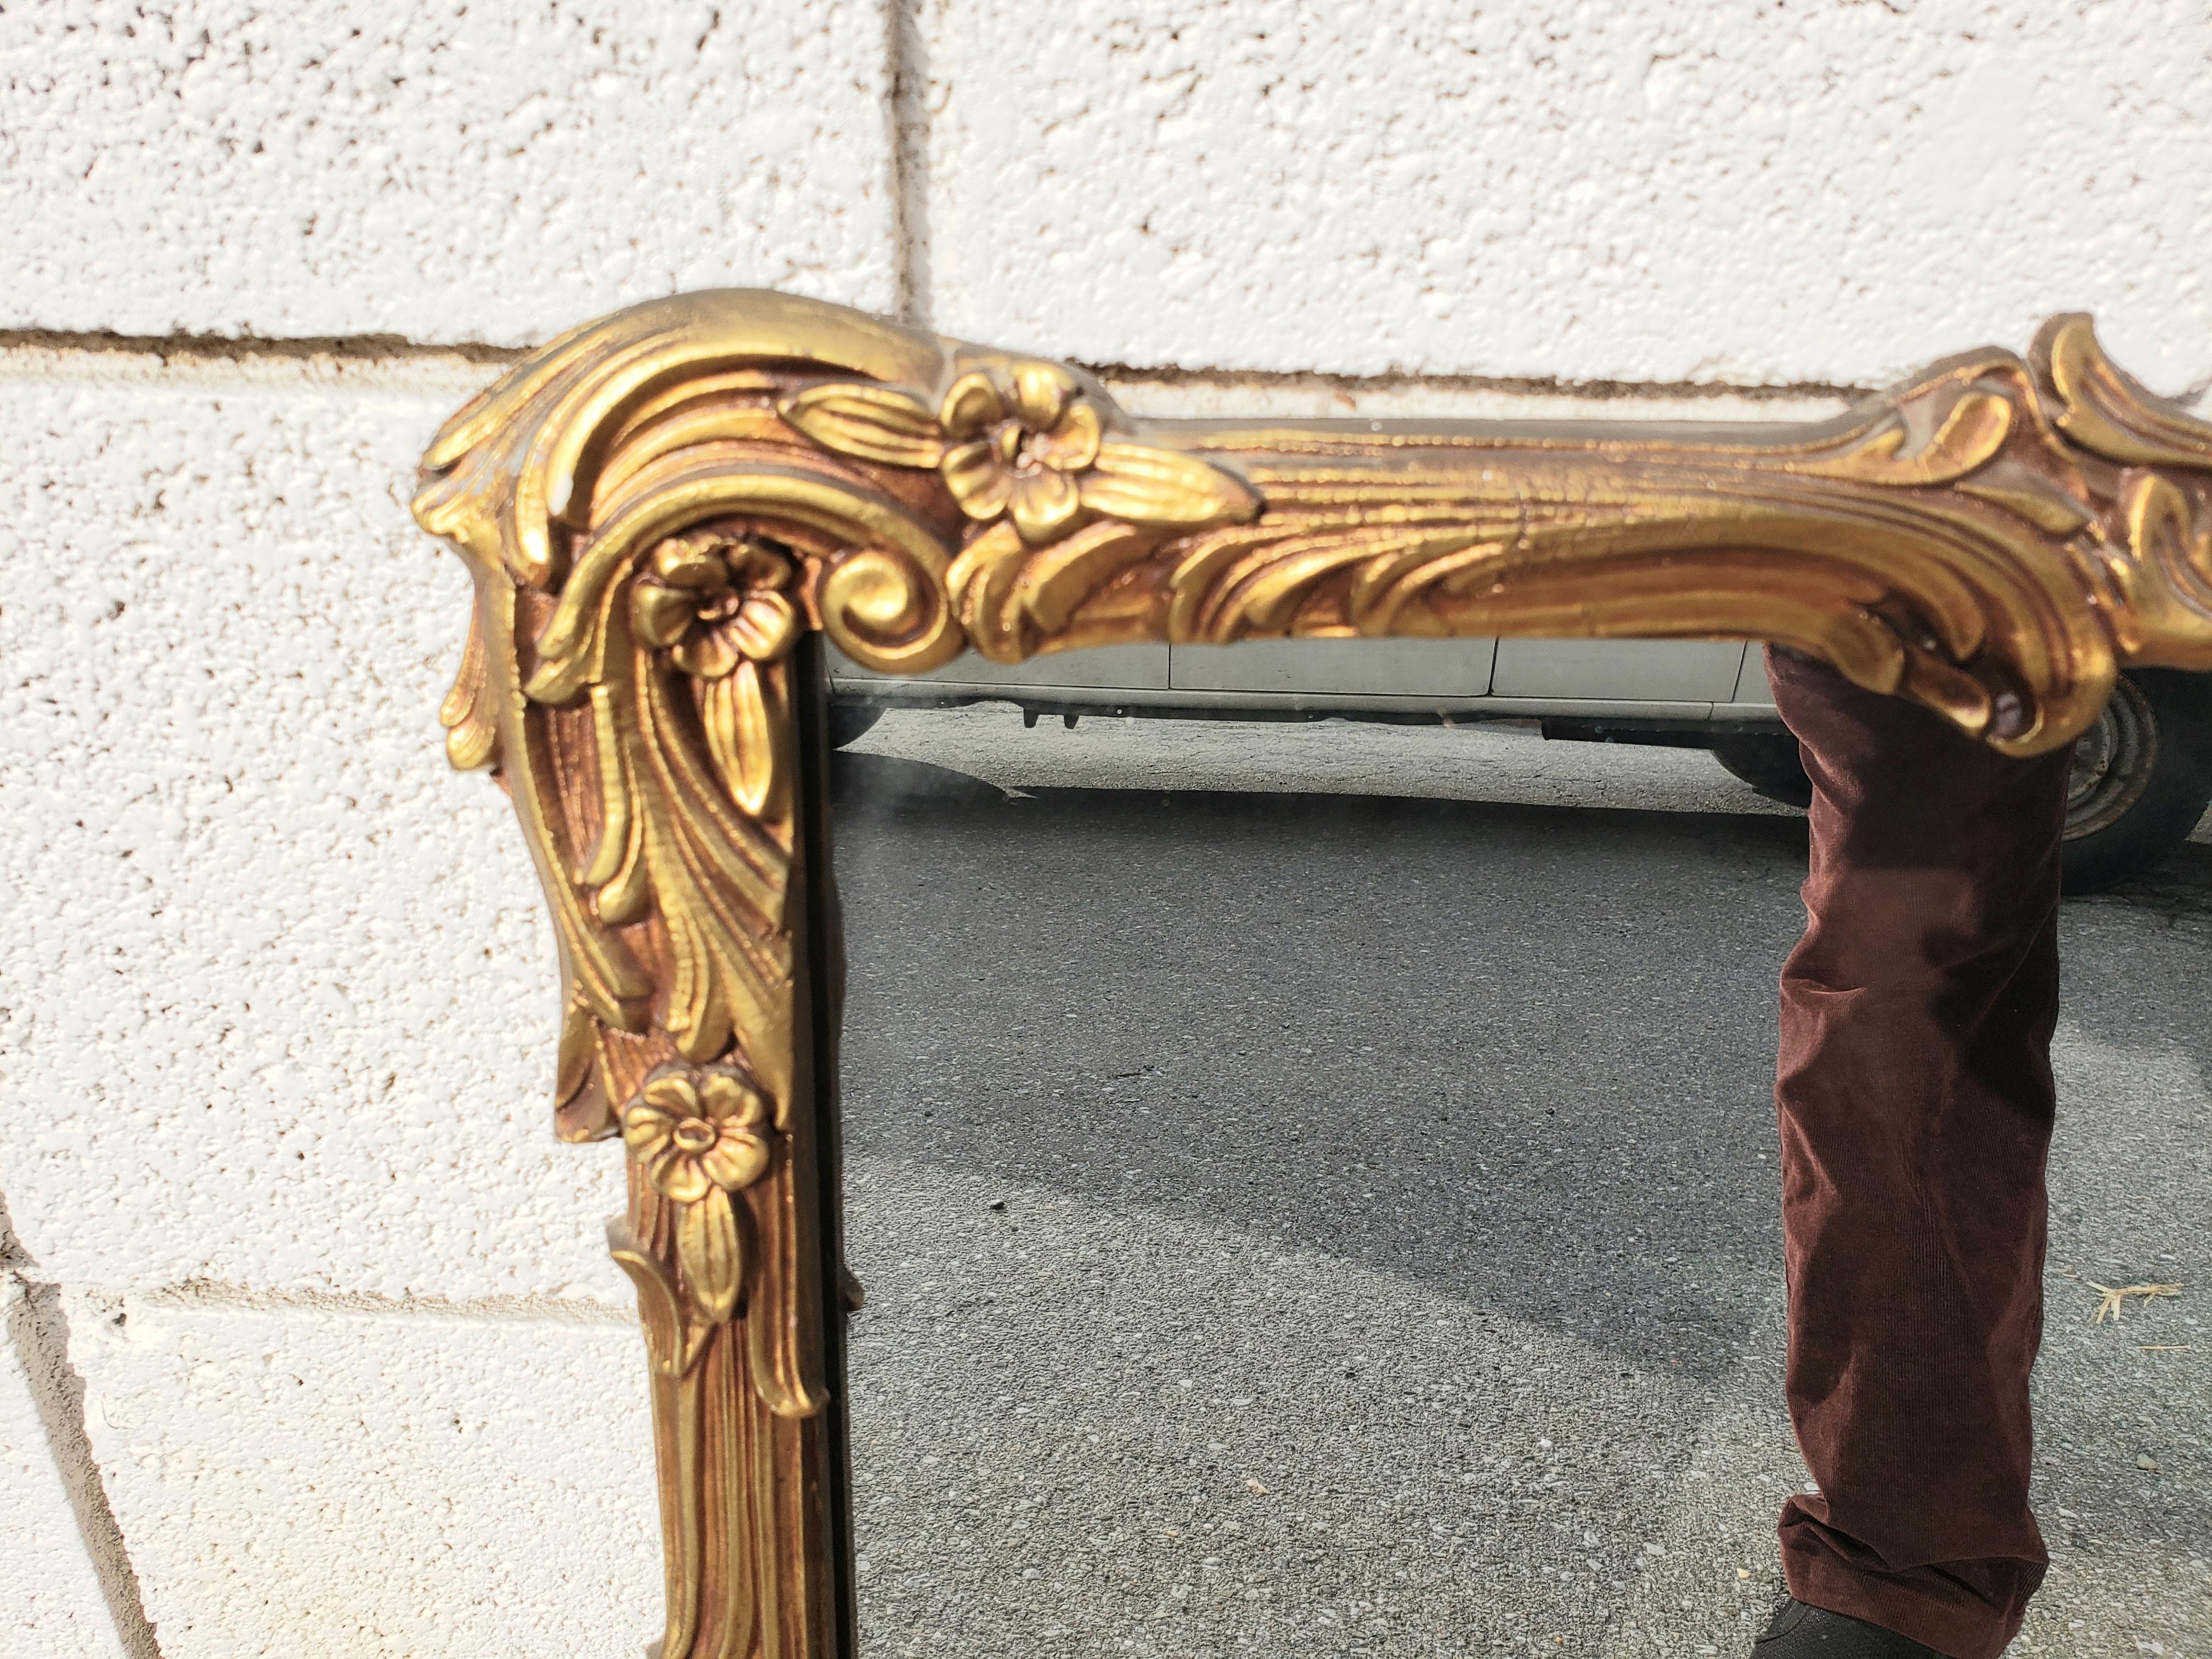 Italian Baroque style giltwood mirror, Circa 1940s
A truly magnificent and very impressive mirror in very good original condition.
Measures 37